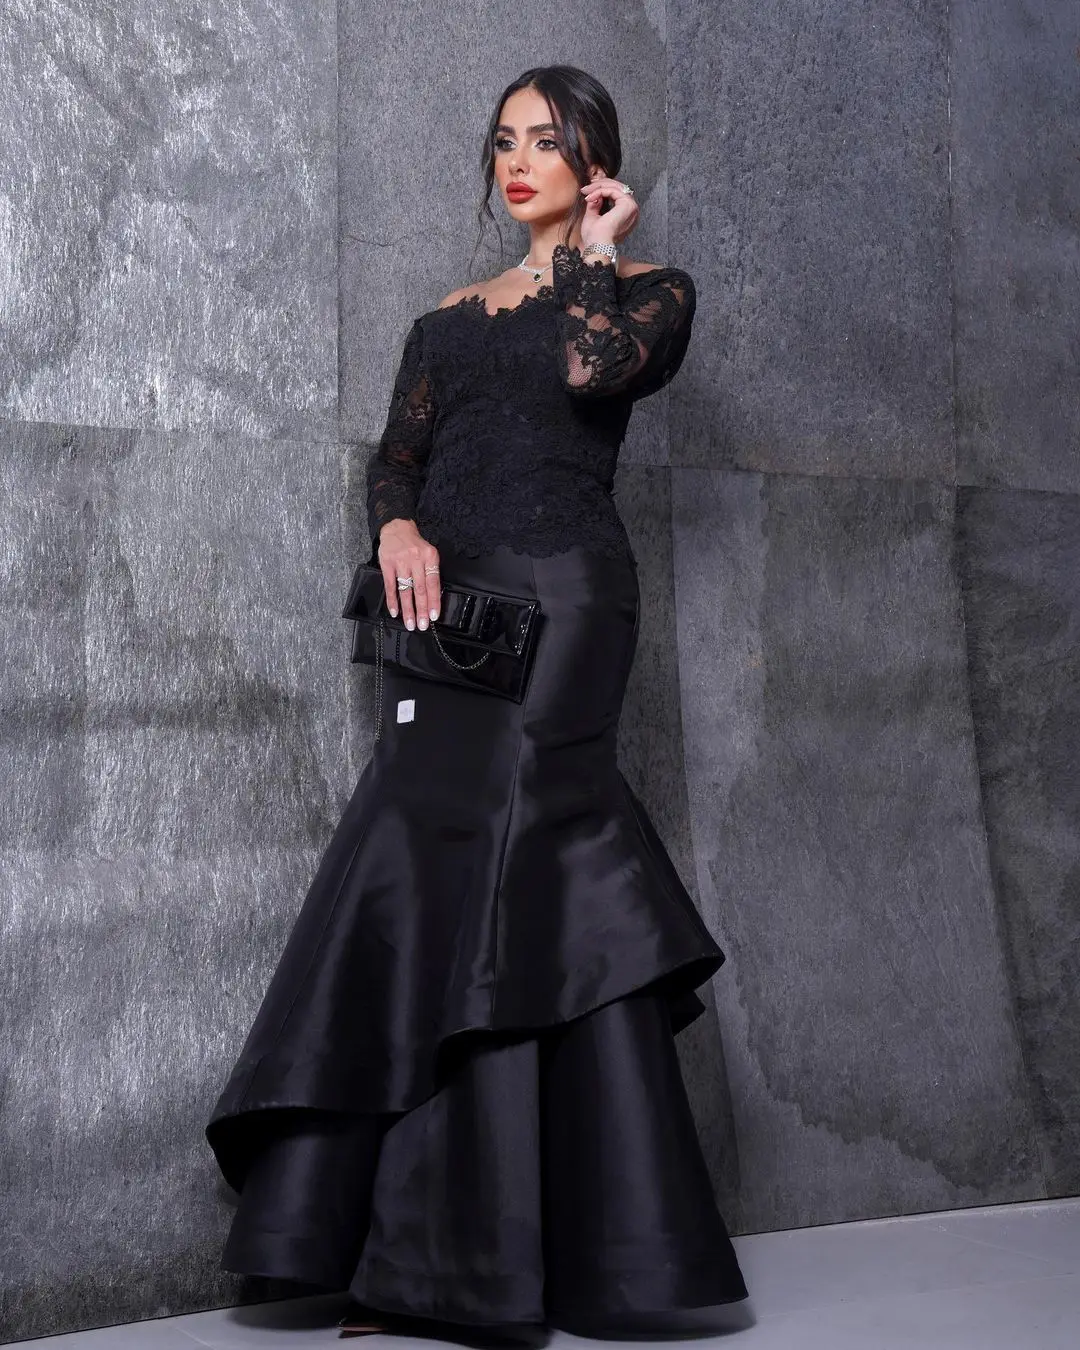 

Santorini Classical Black Tiered Mermaid Evening Dresses Bateau Neck Lace Applique Long Sleeves Prom Trumpet Party Bridal Gowns